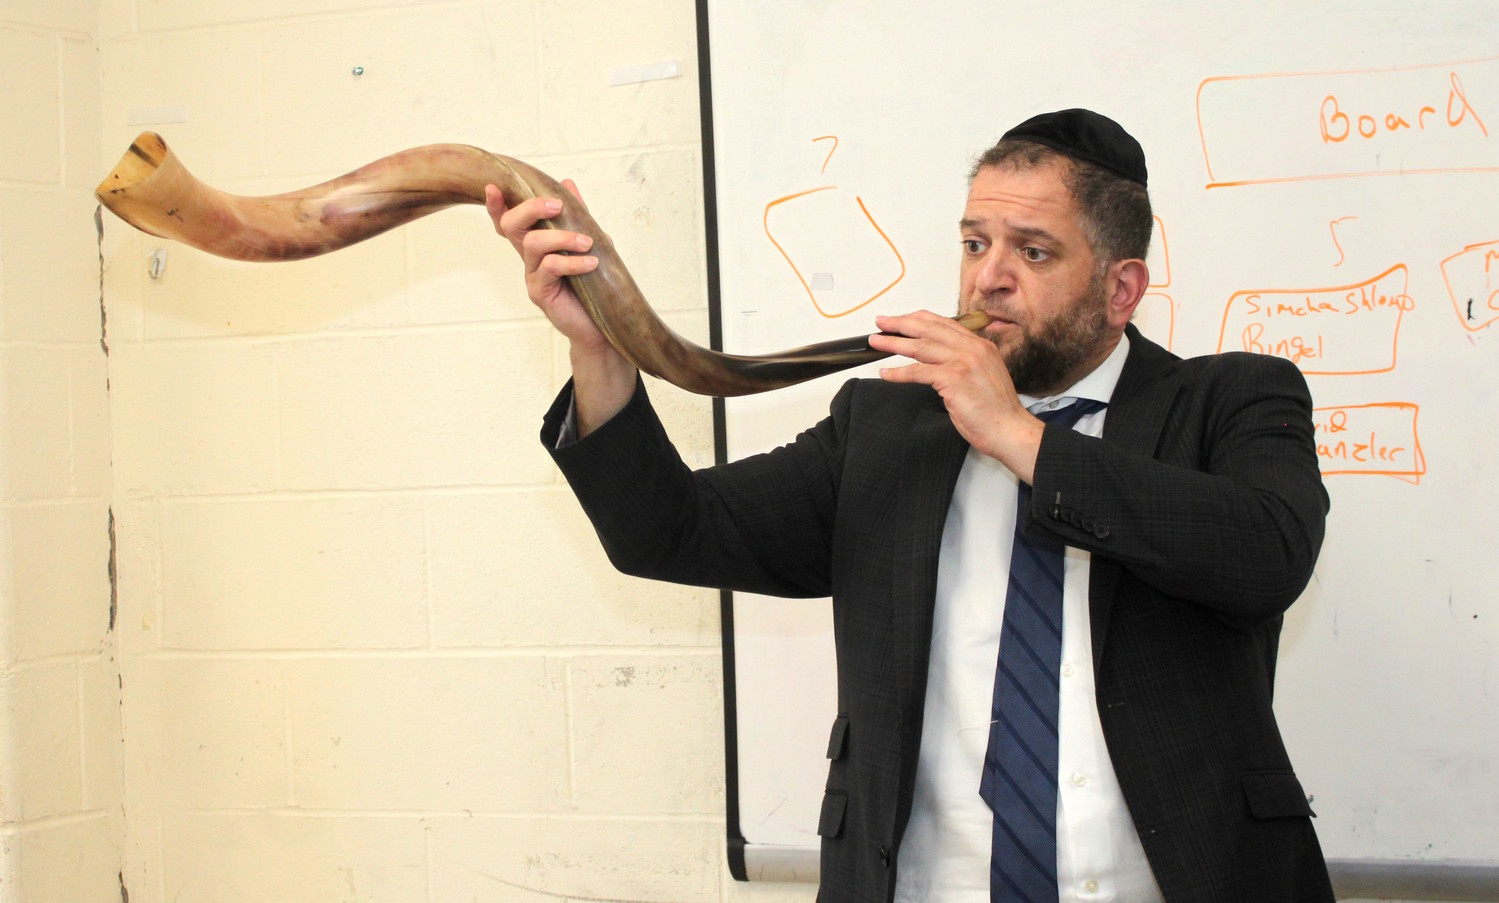 Rabbi Avrohom Moshe Heller, a second grade rebbi at Yeshiva Darchei Torah in Far Rockaway, blows the shofar of a kudu for his class on Tuesday, the first day of school.